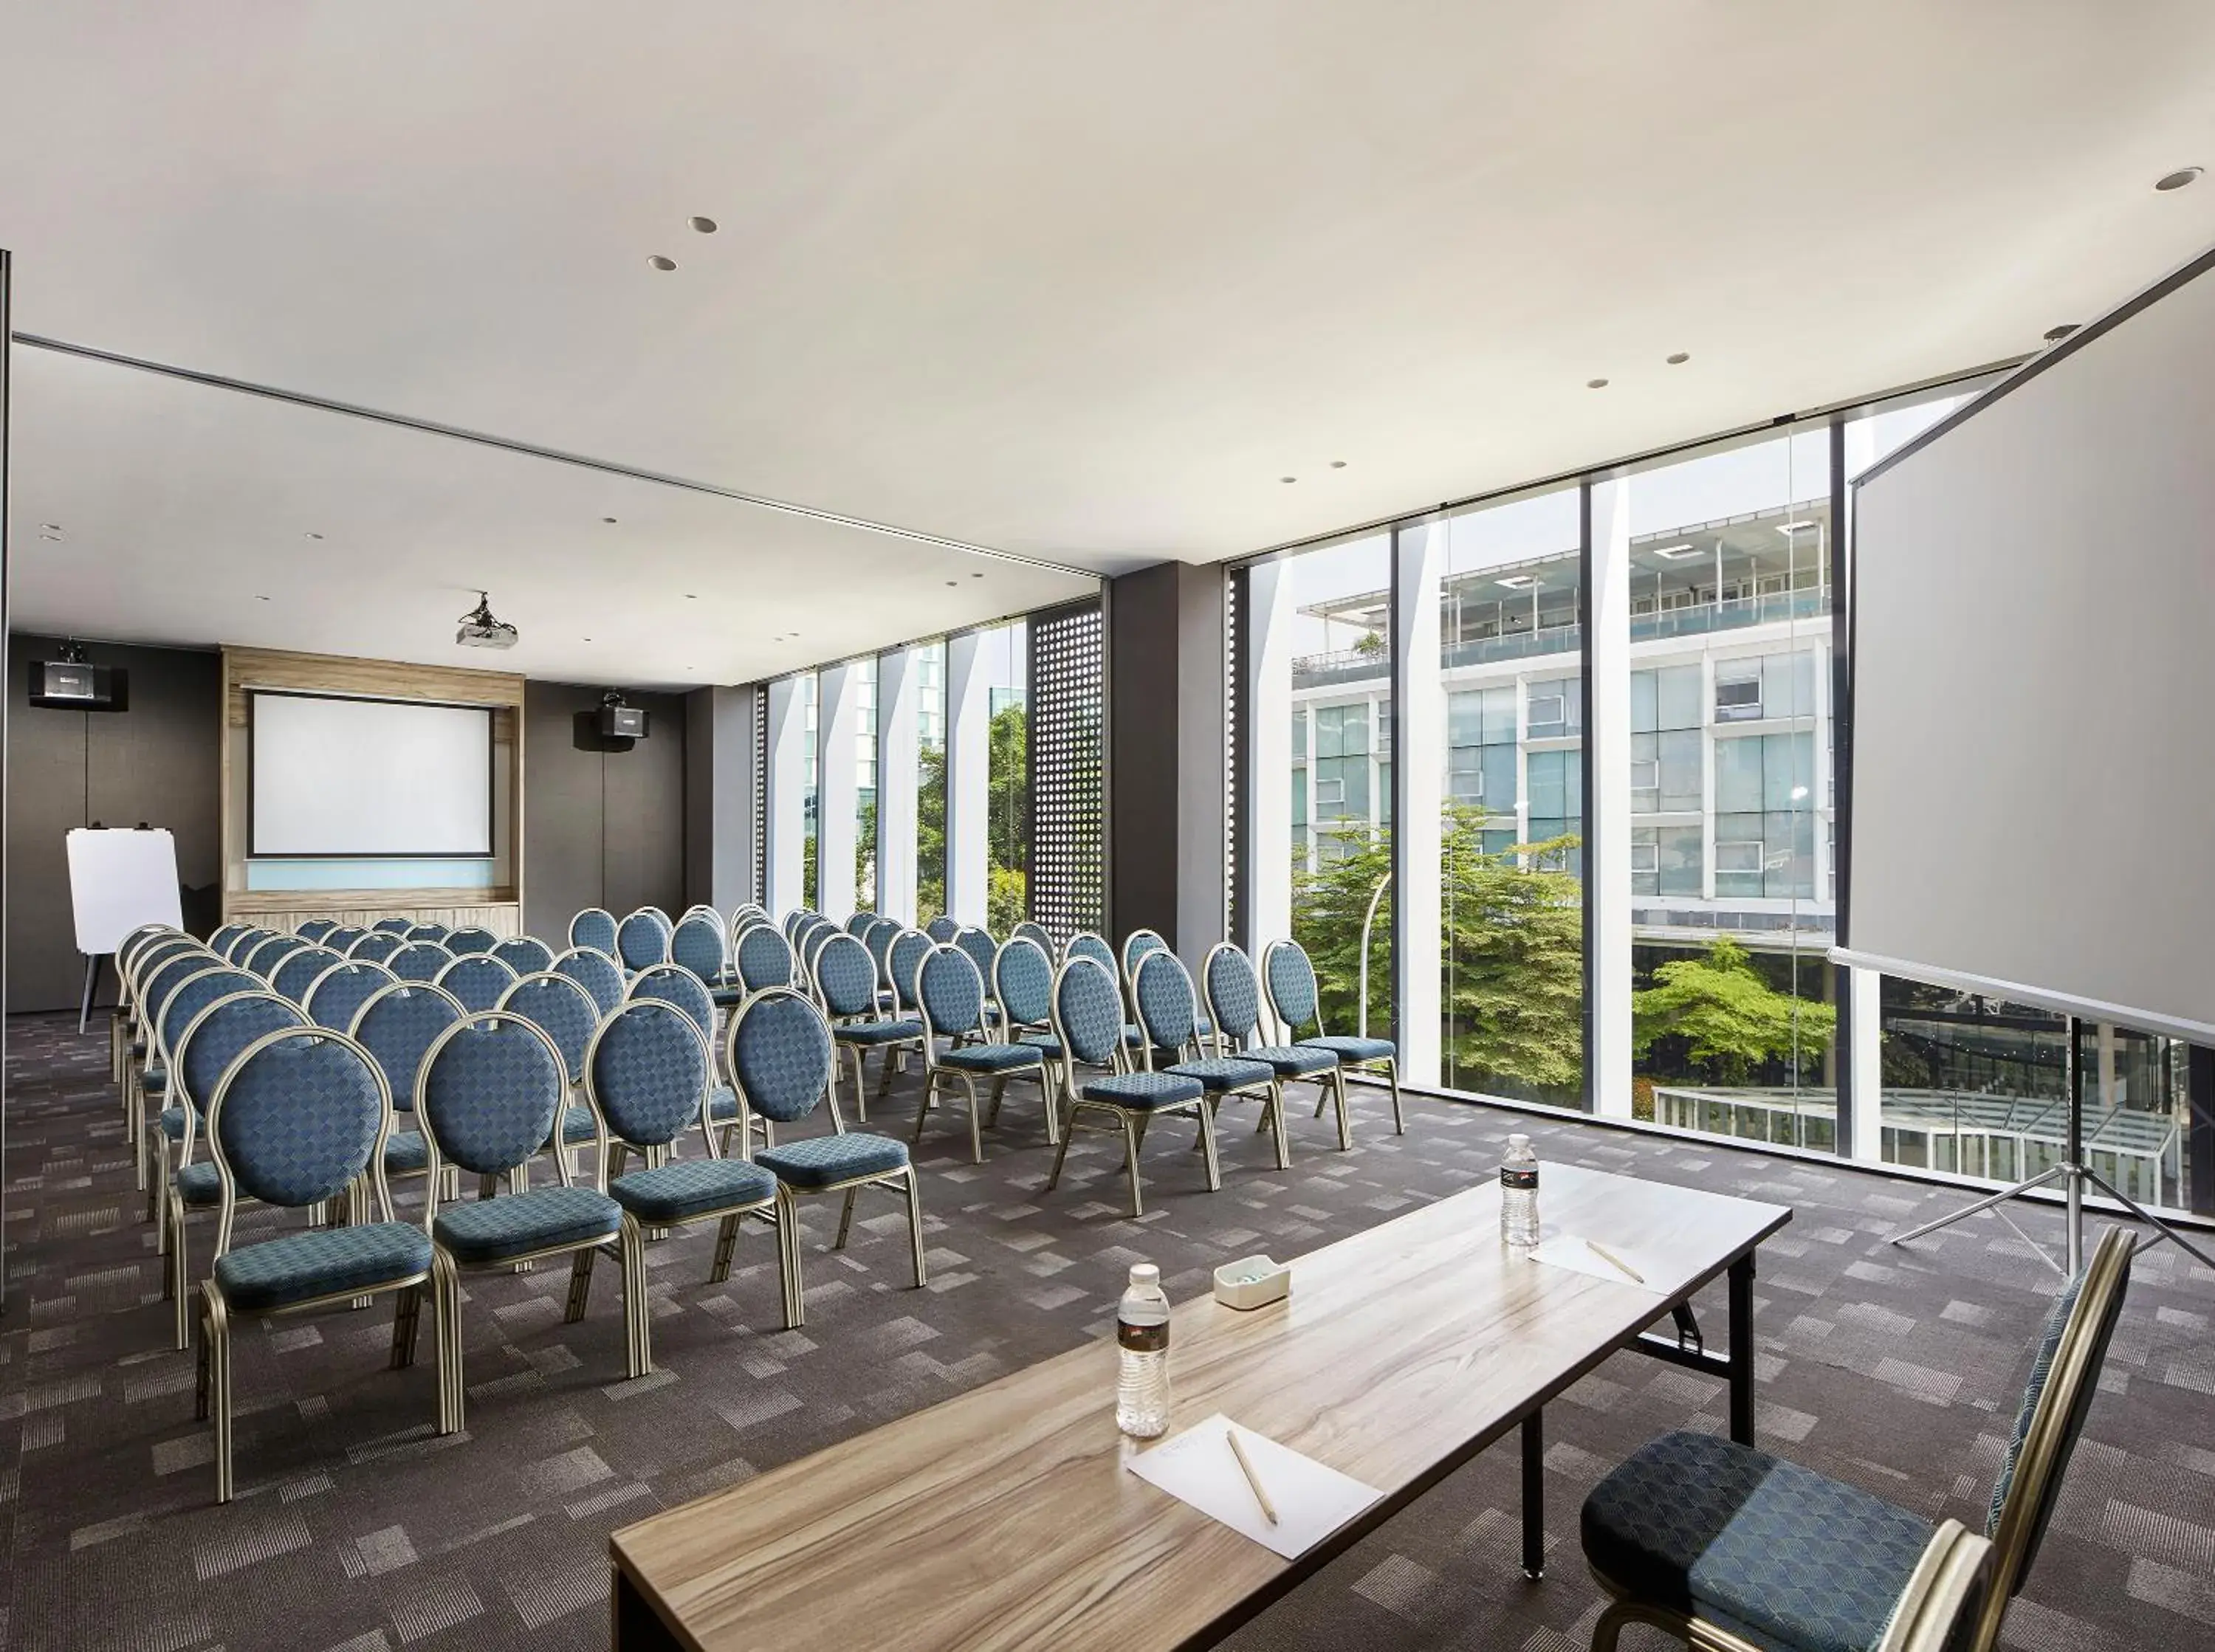 Meeting/conference room in Erian Hotel